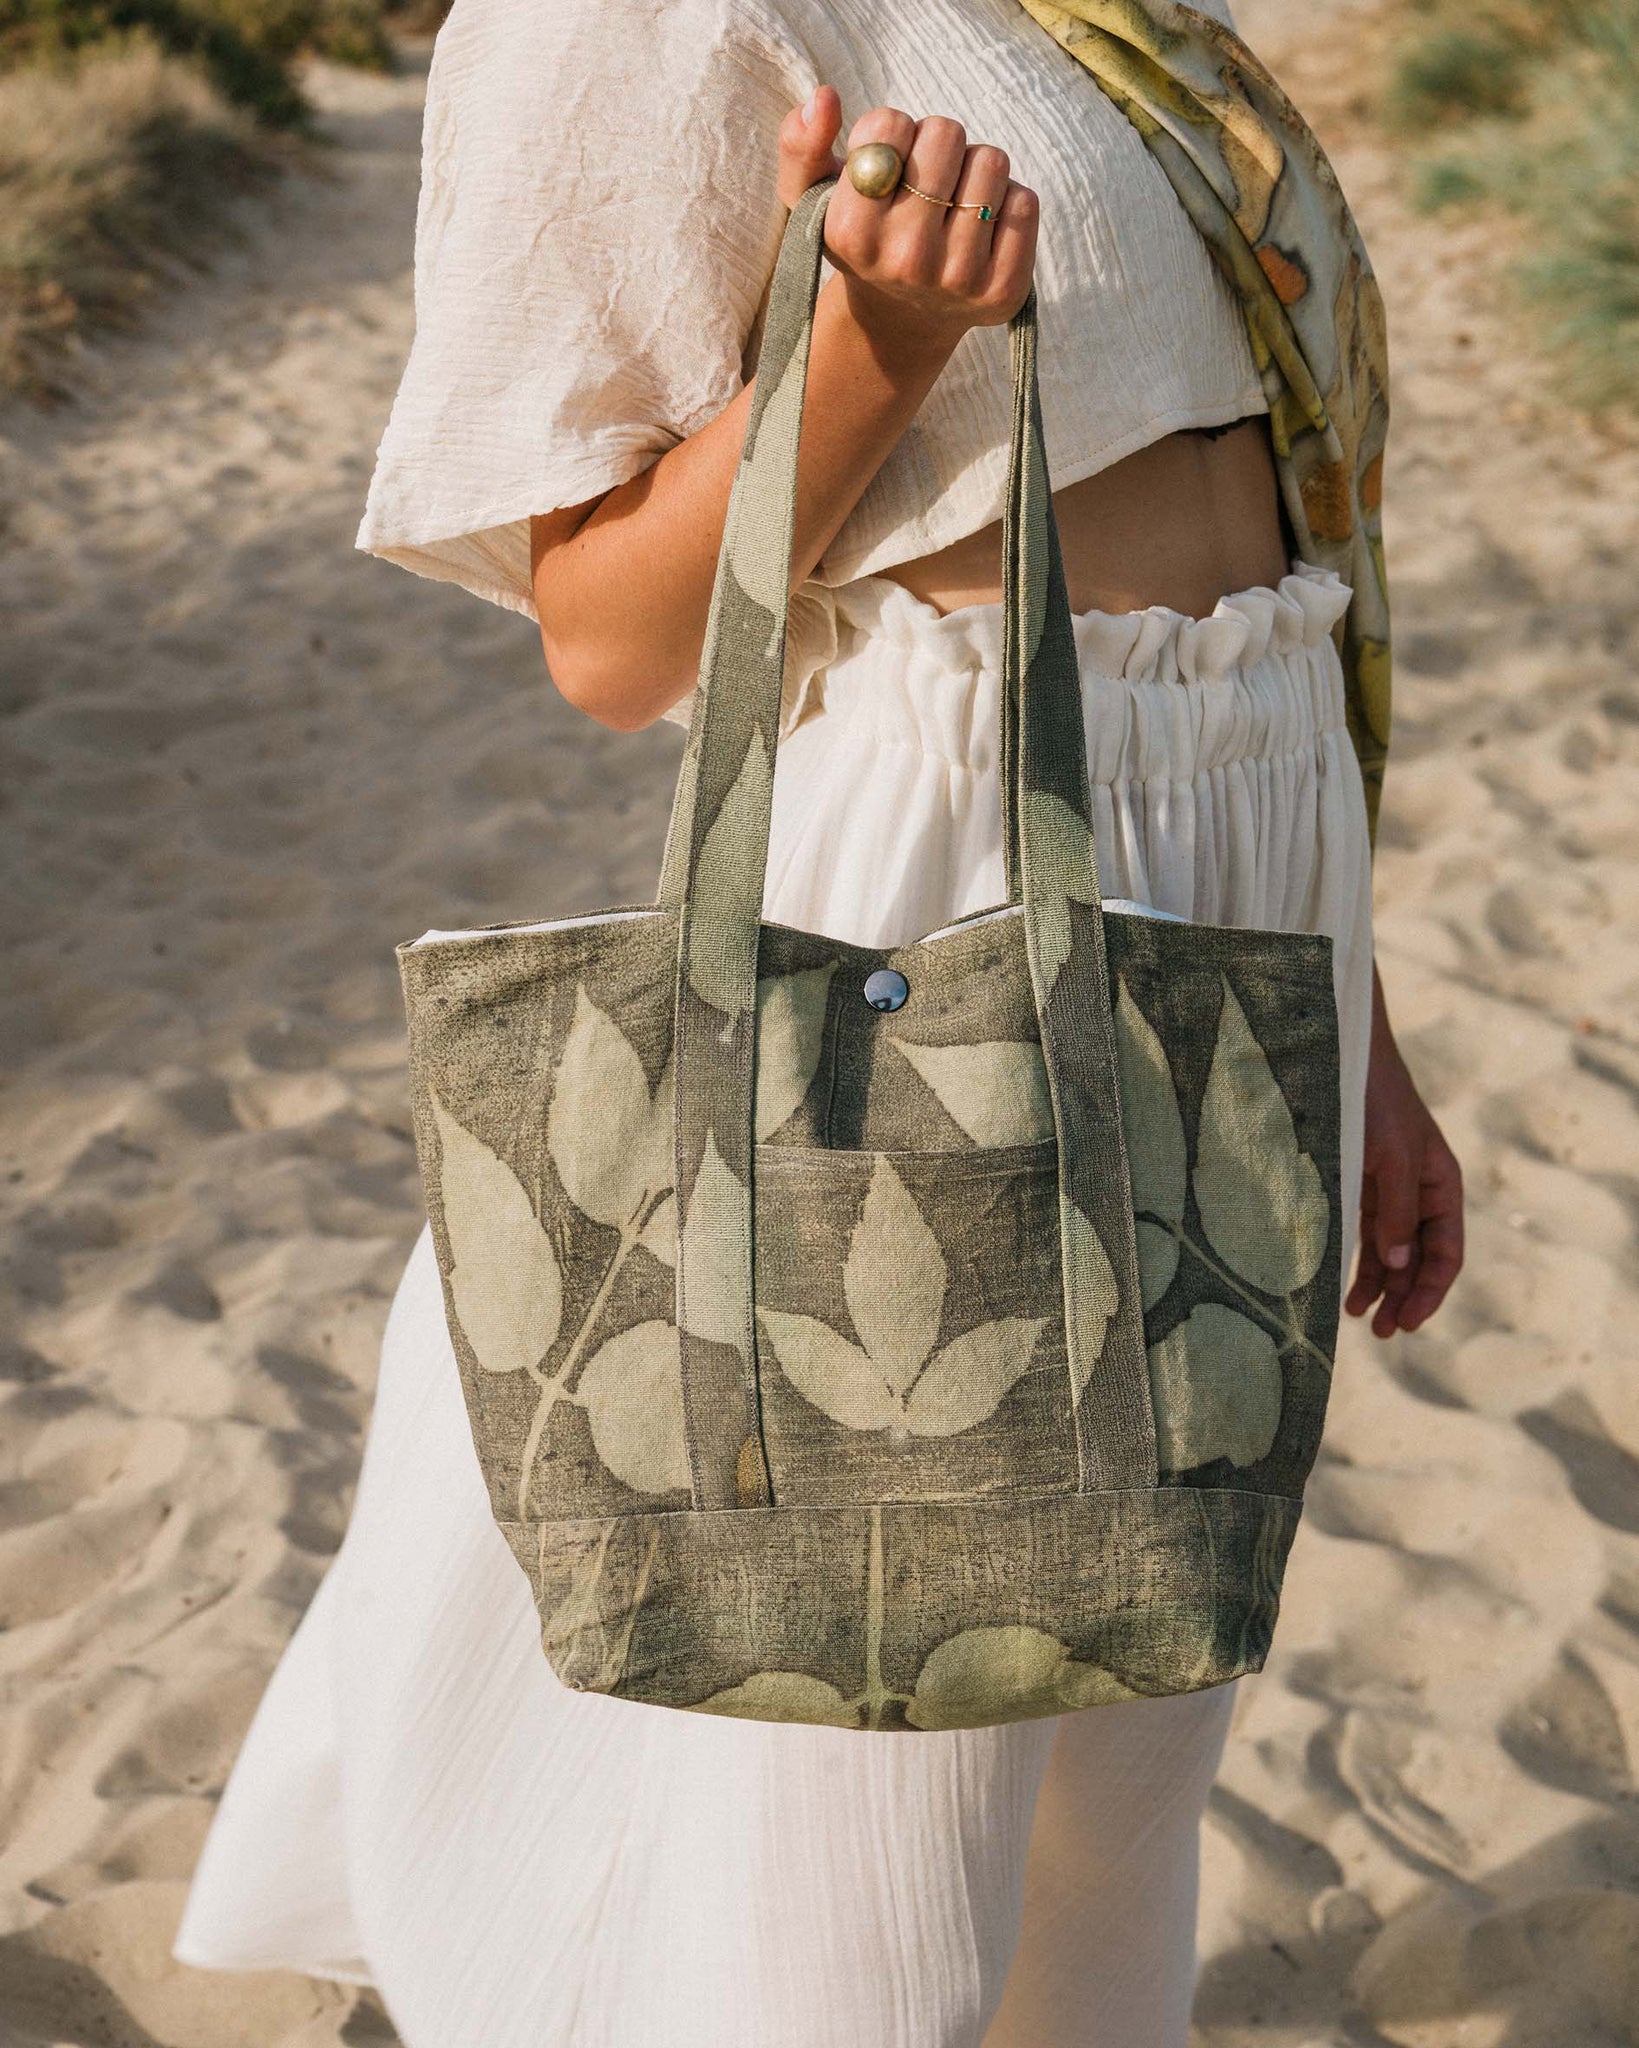 Tote bag made from hemp and naturally dyed using leaves